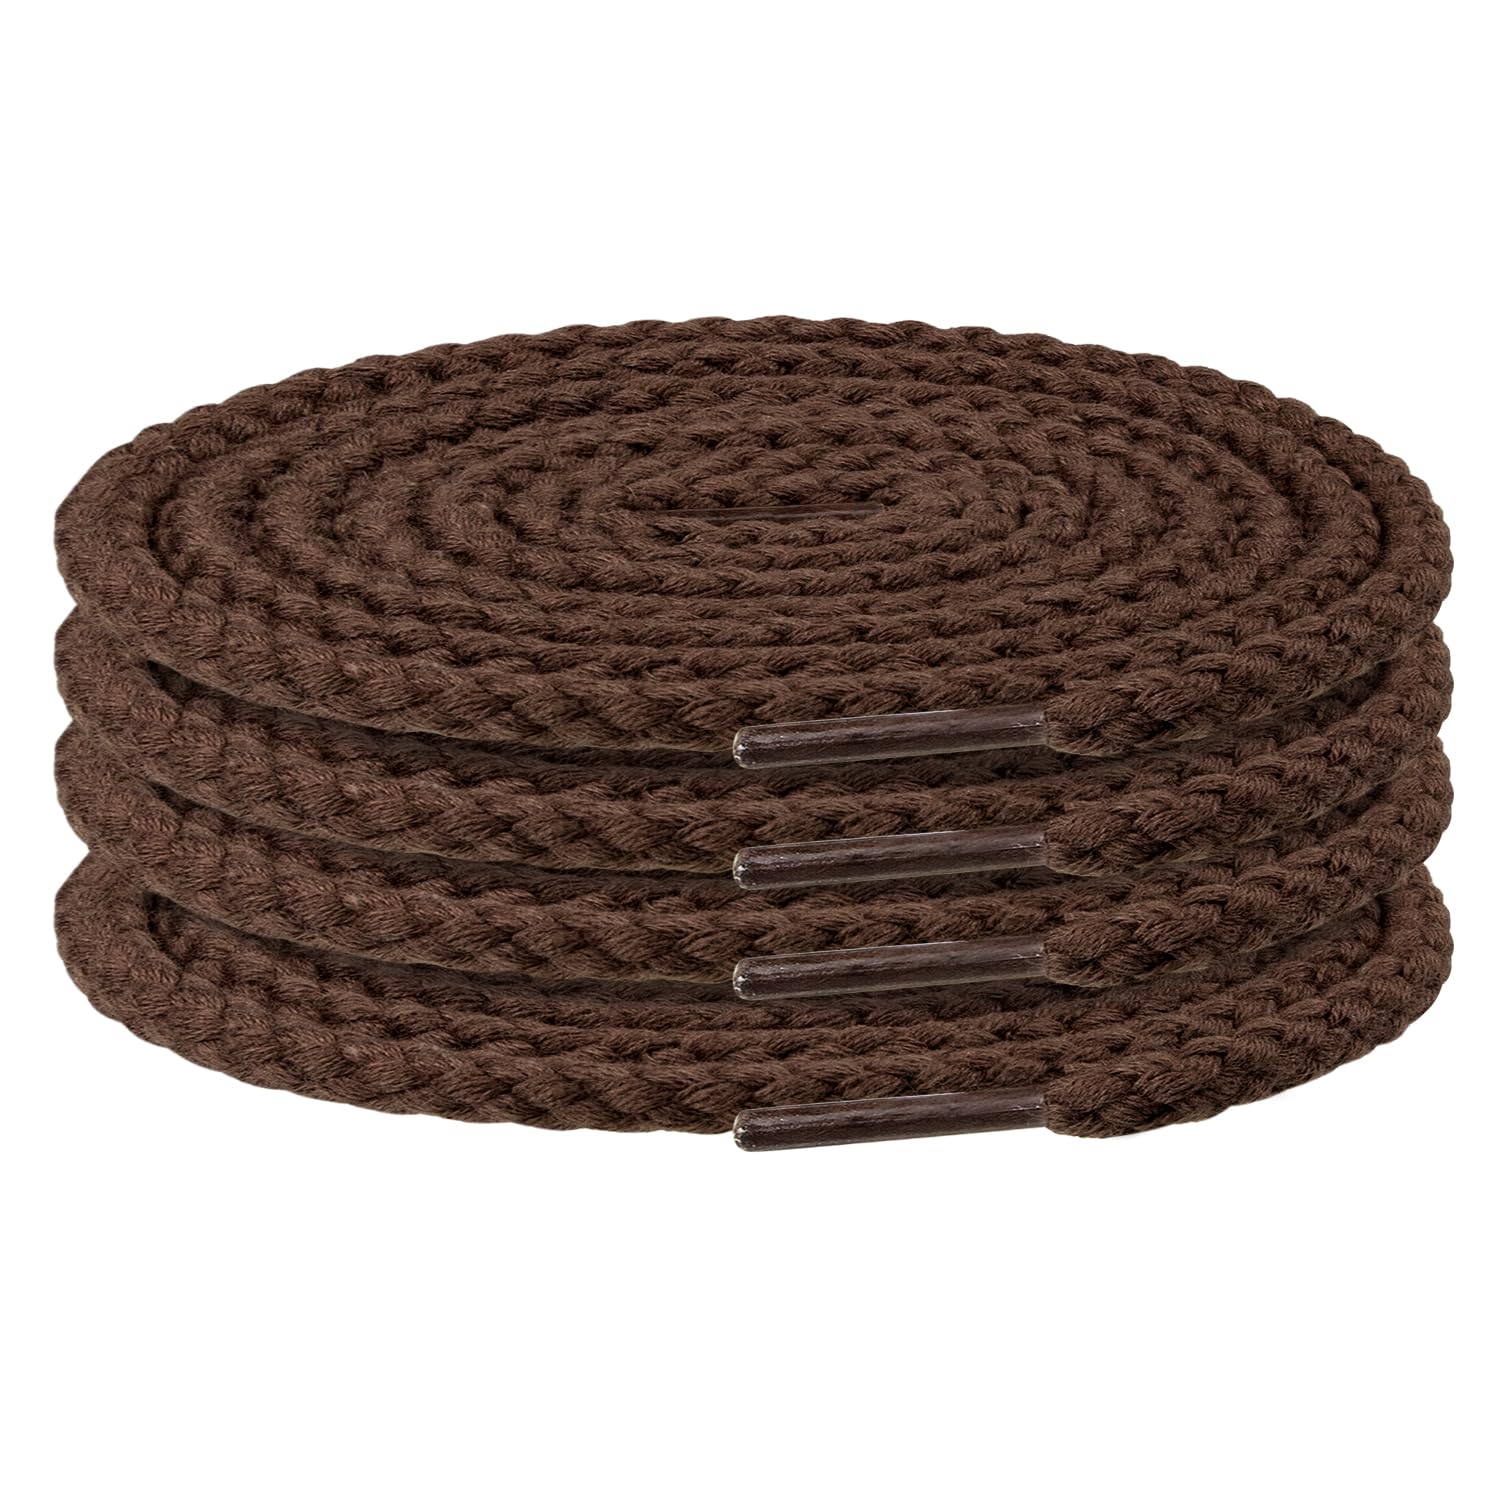 Endoto 2 Pairs Round Rope Shoe Laces Thick Cotton Shoelaces Strings for Air Force 1, Air Jordan,Dunk Chunky Twisted Shoelaces Sneaker Shoes(Color:Brown,Size:7MM-50Inch)